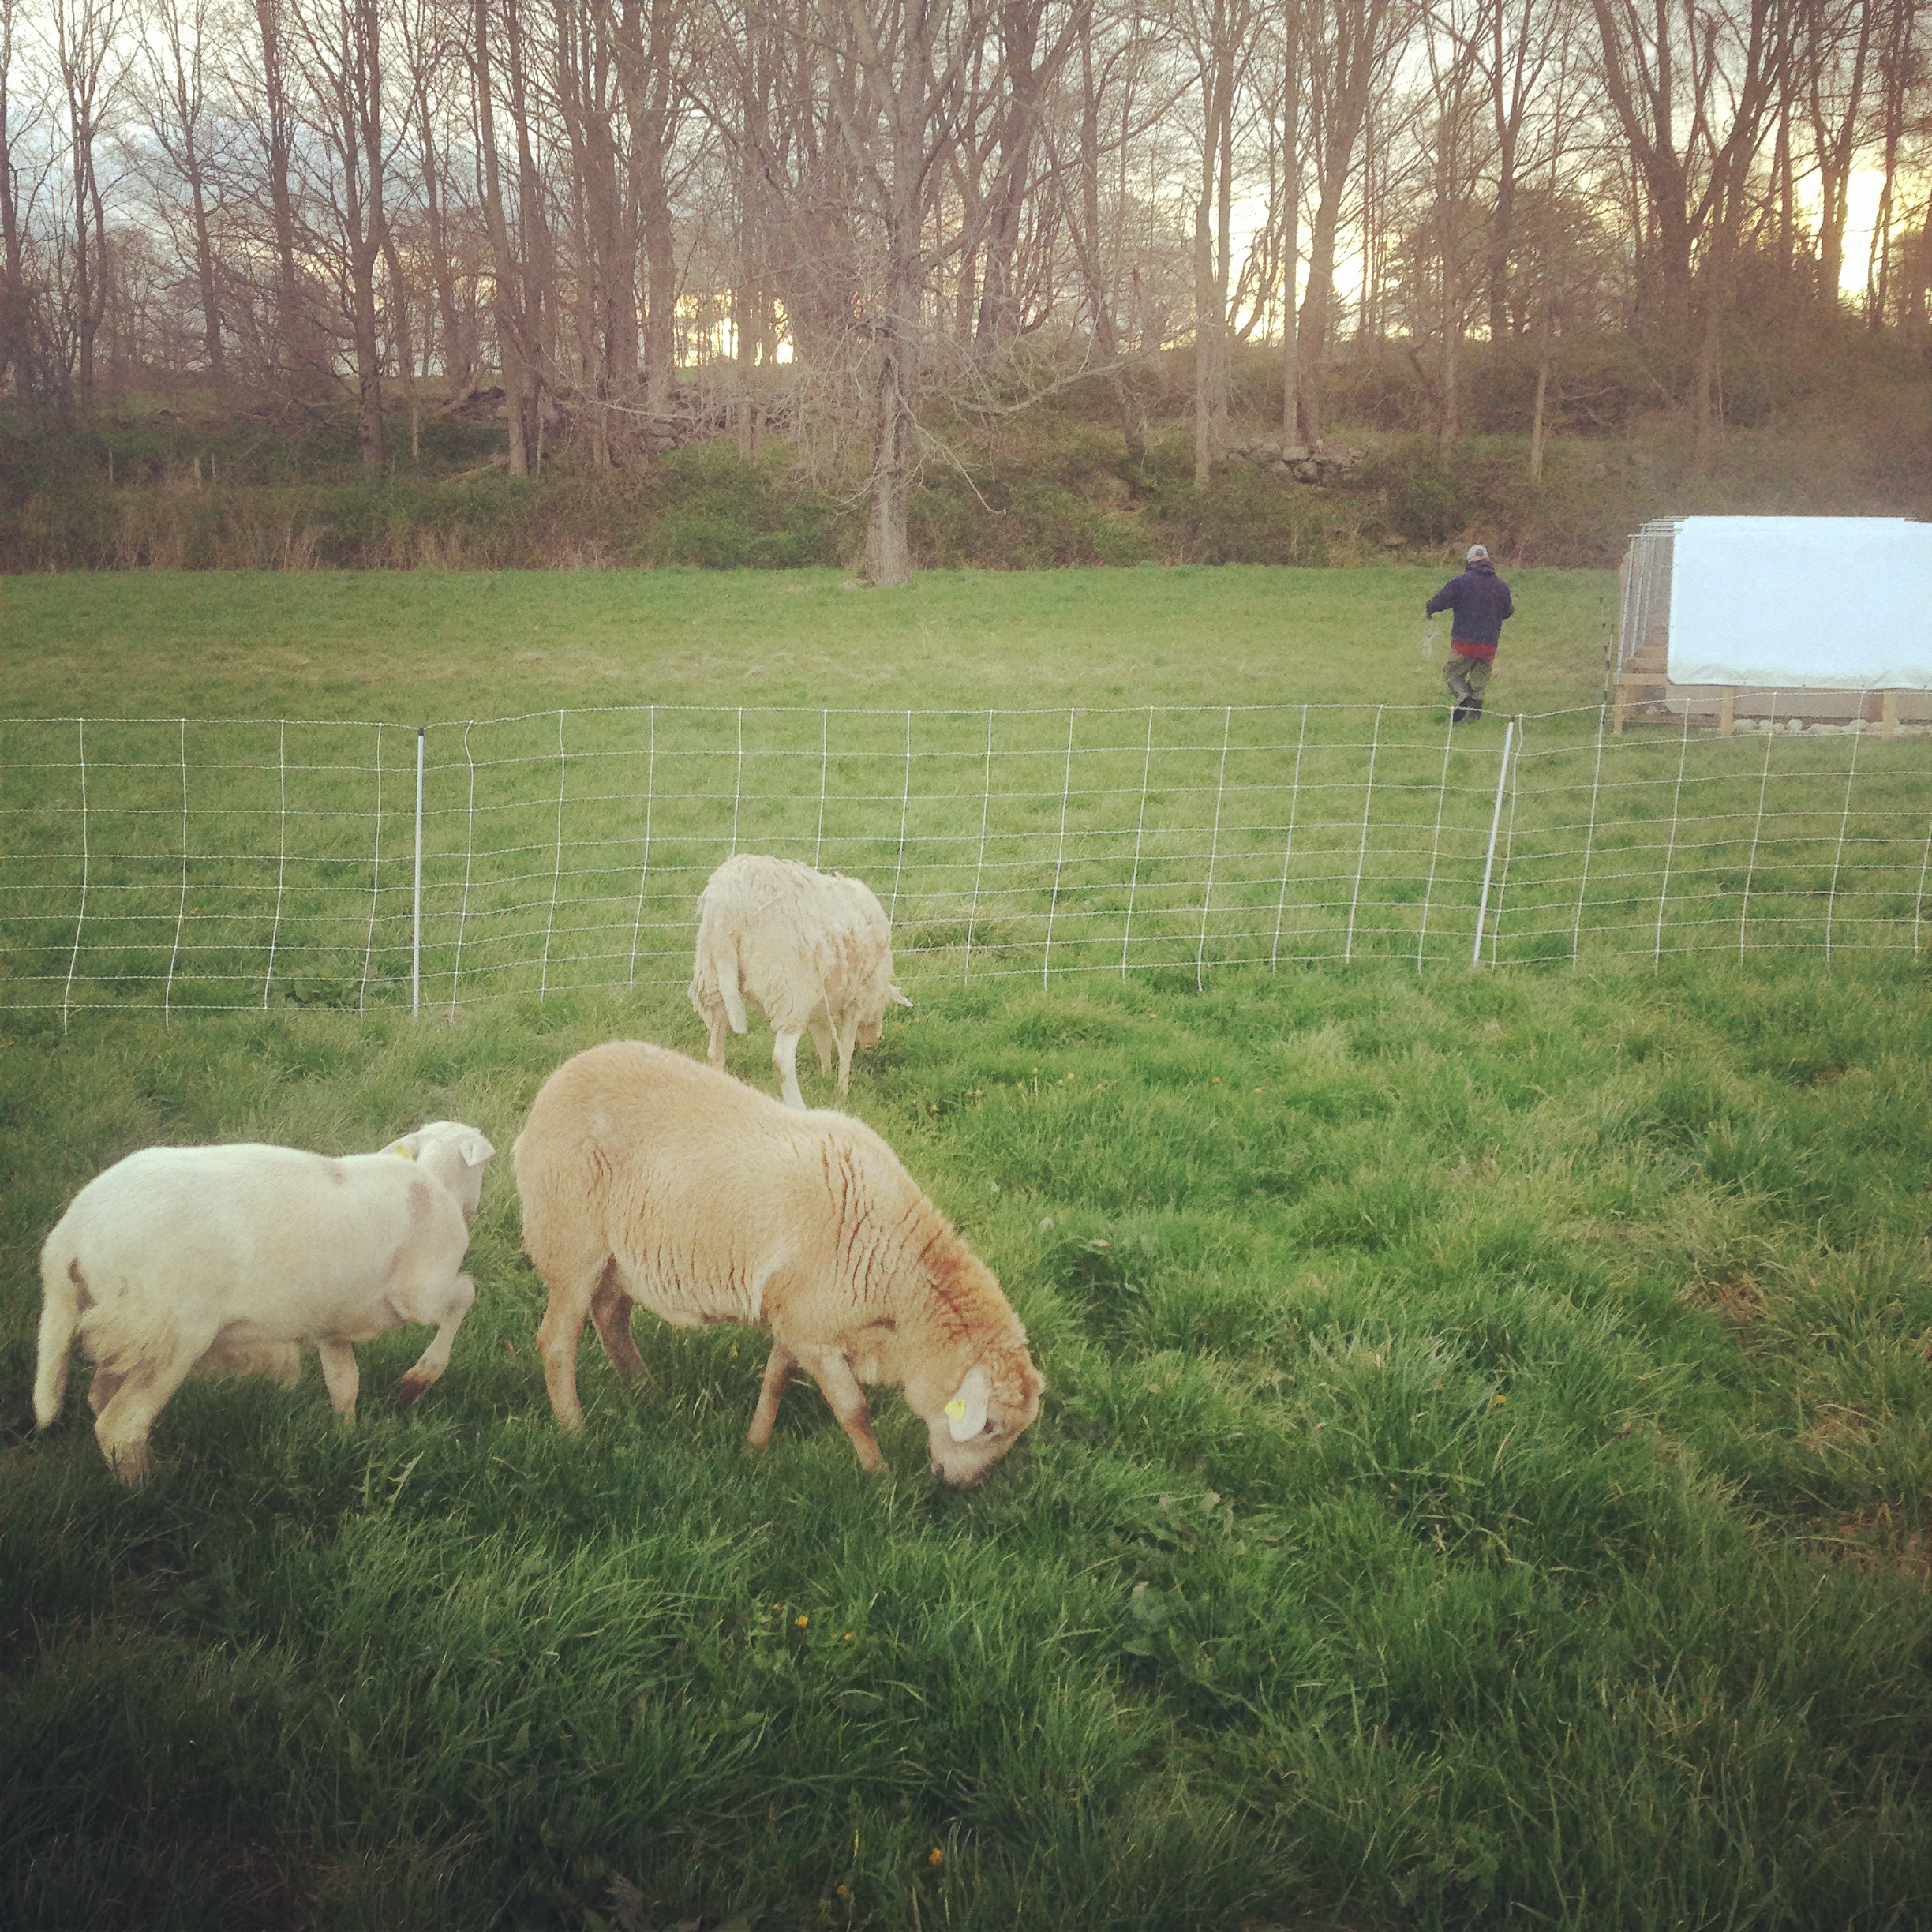  We rotated sheep in front of broilers and layers to keep grass mowed and provide us with a little mutton sausage. 